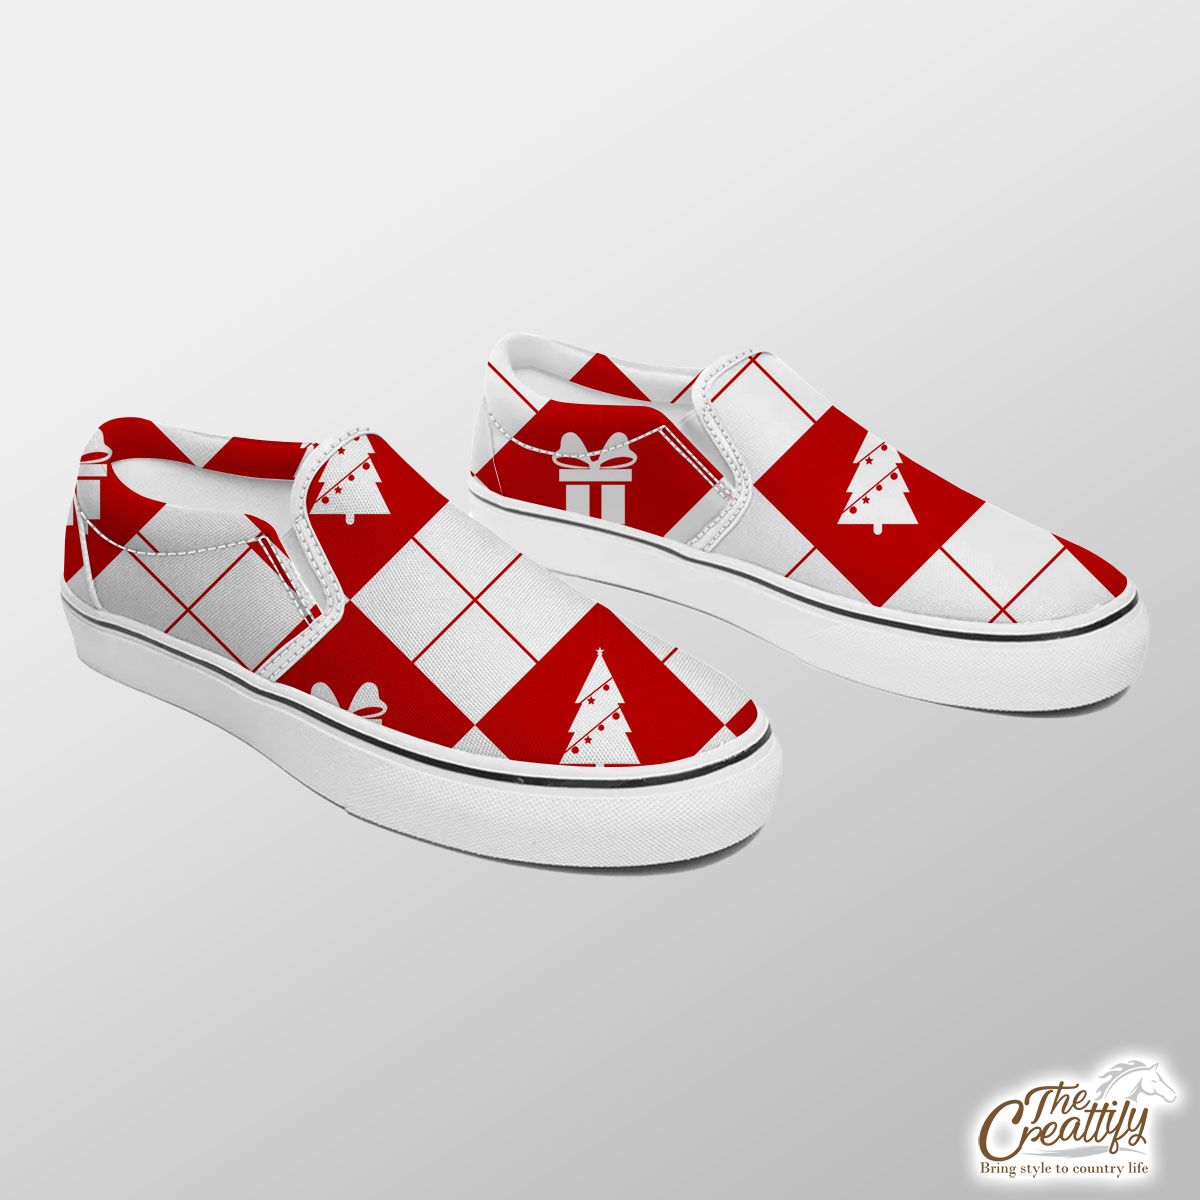 Christmas Gifts And Pine Tree Decorated With Lights On Red And White Background Slip On Sneakers